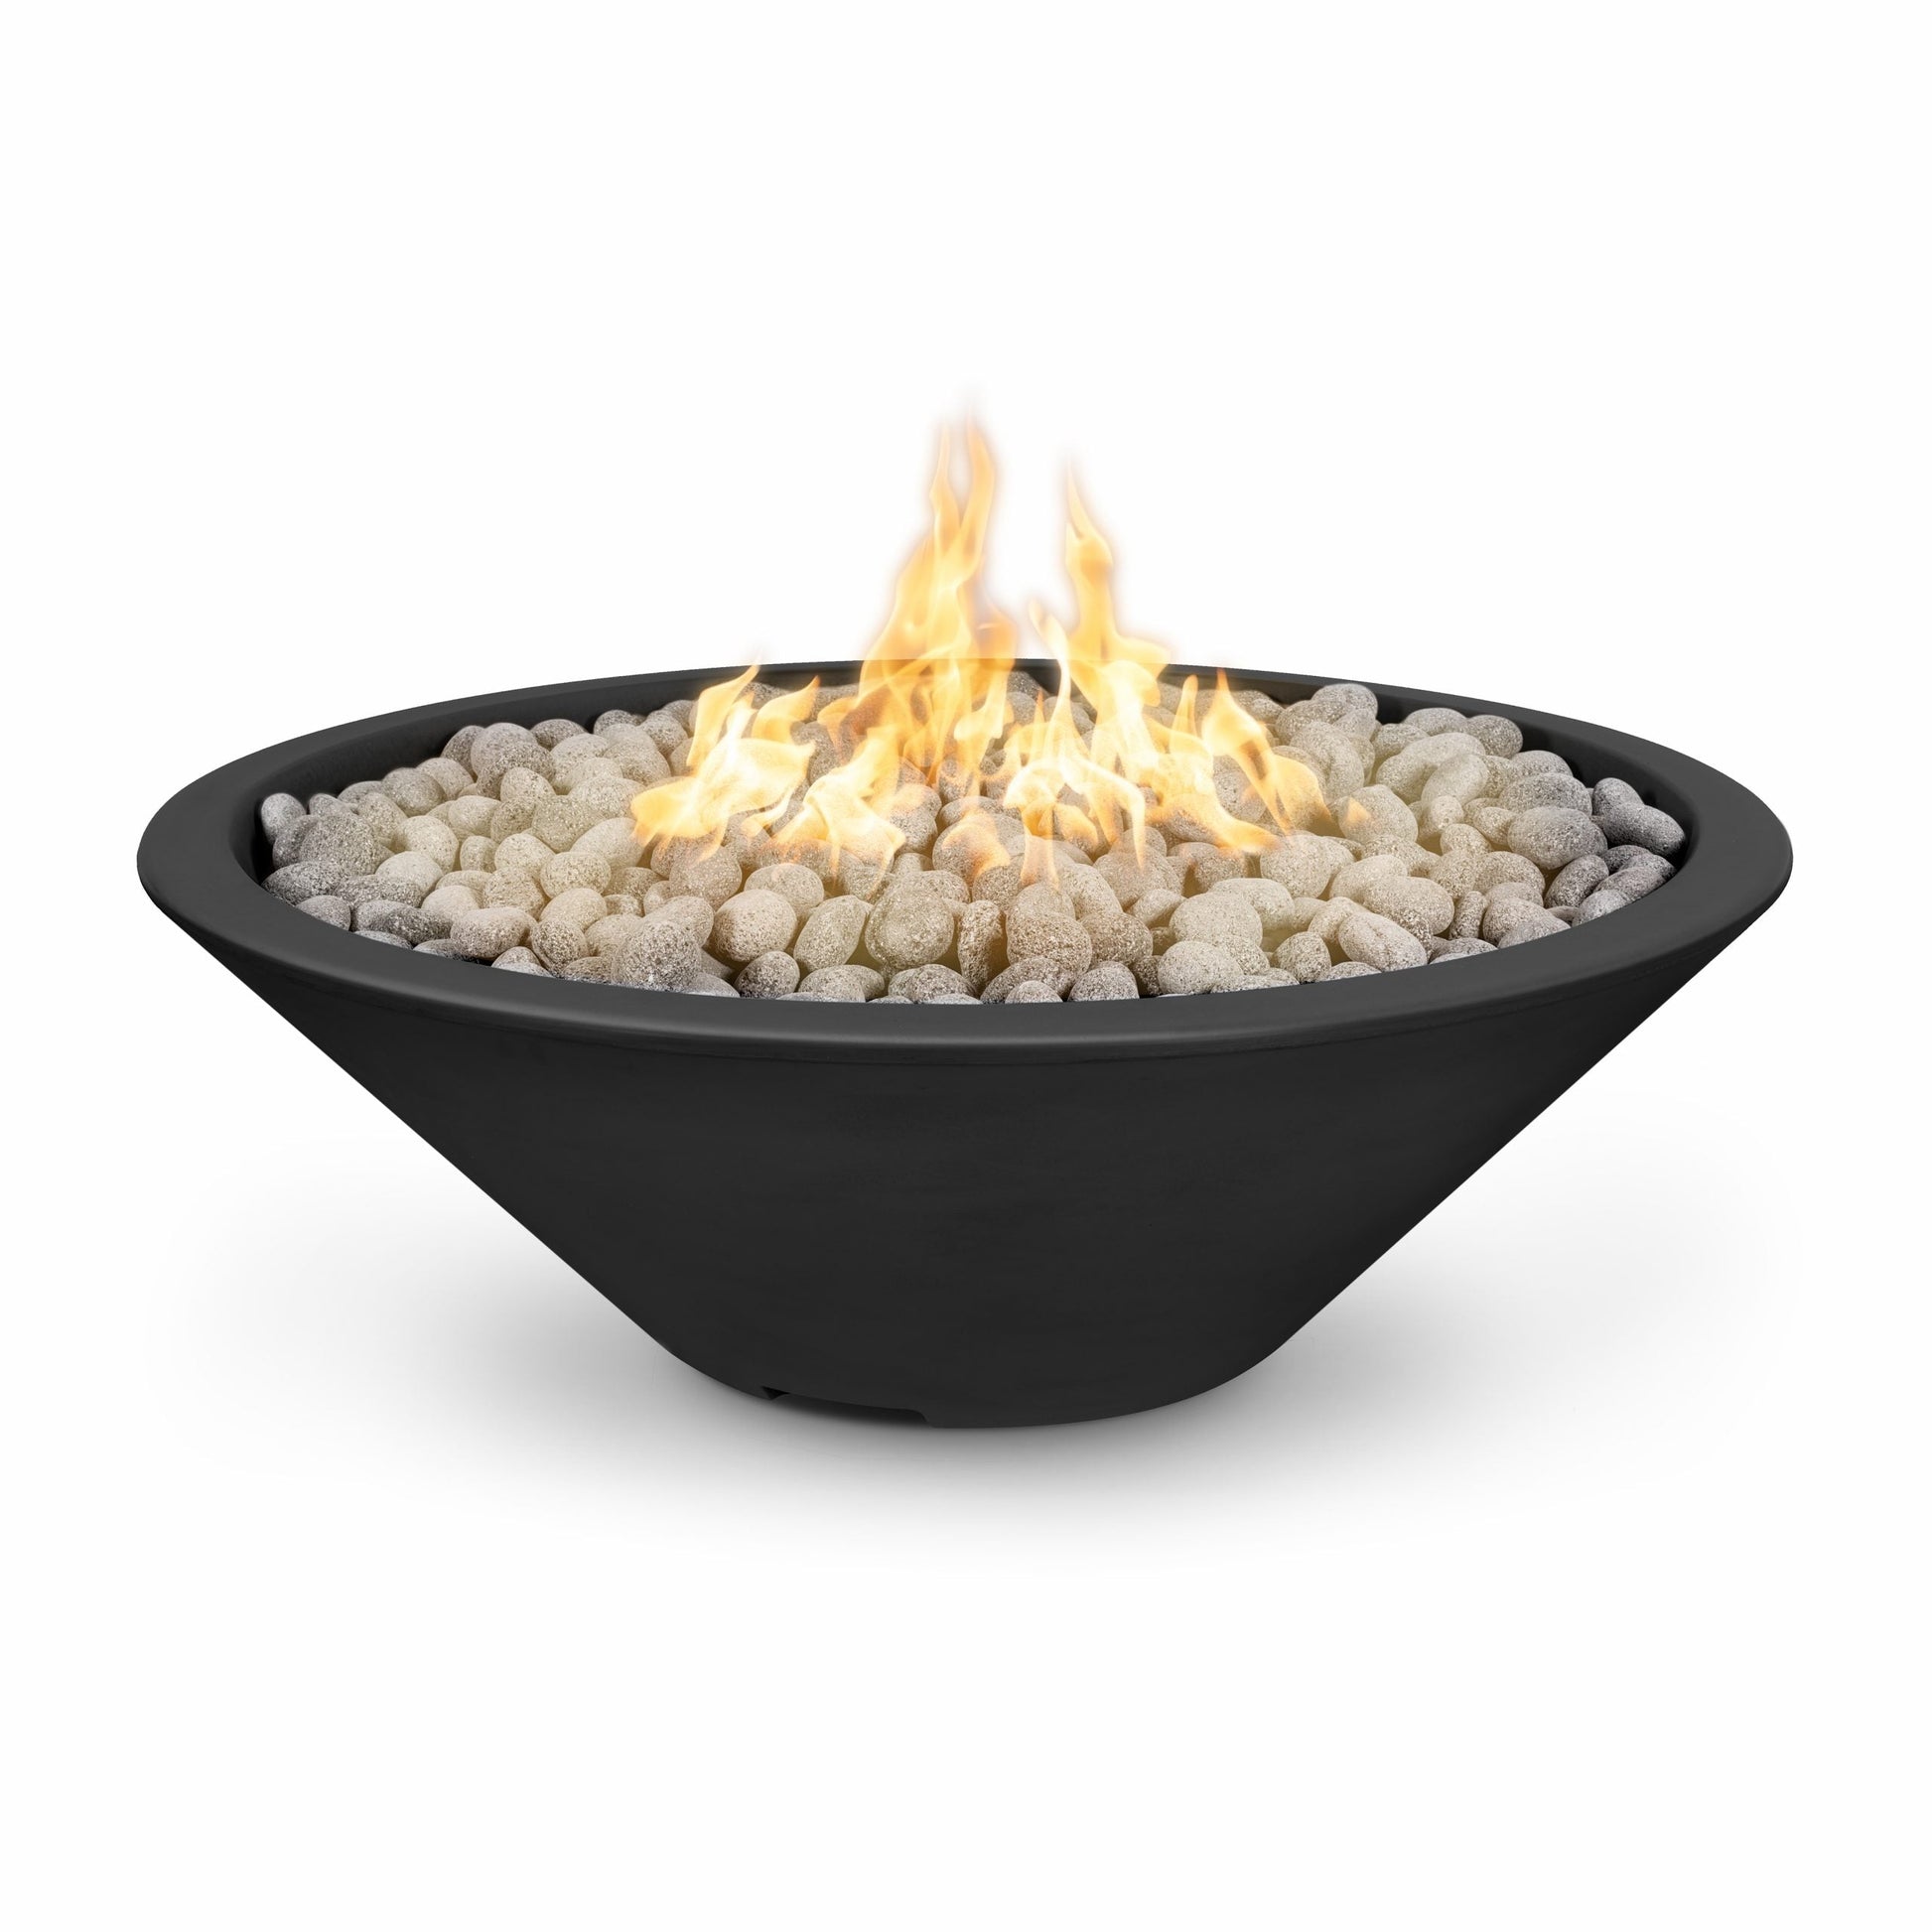 The Outdoor Plus Round Cazo 48" Copper Vein Powder Coated Metal Liquid Propane Fire Pit with Match Lit Ignition